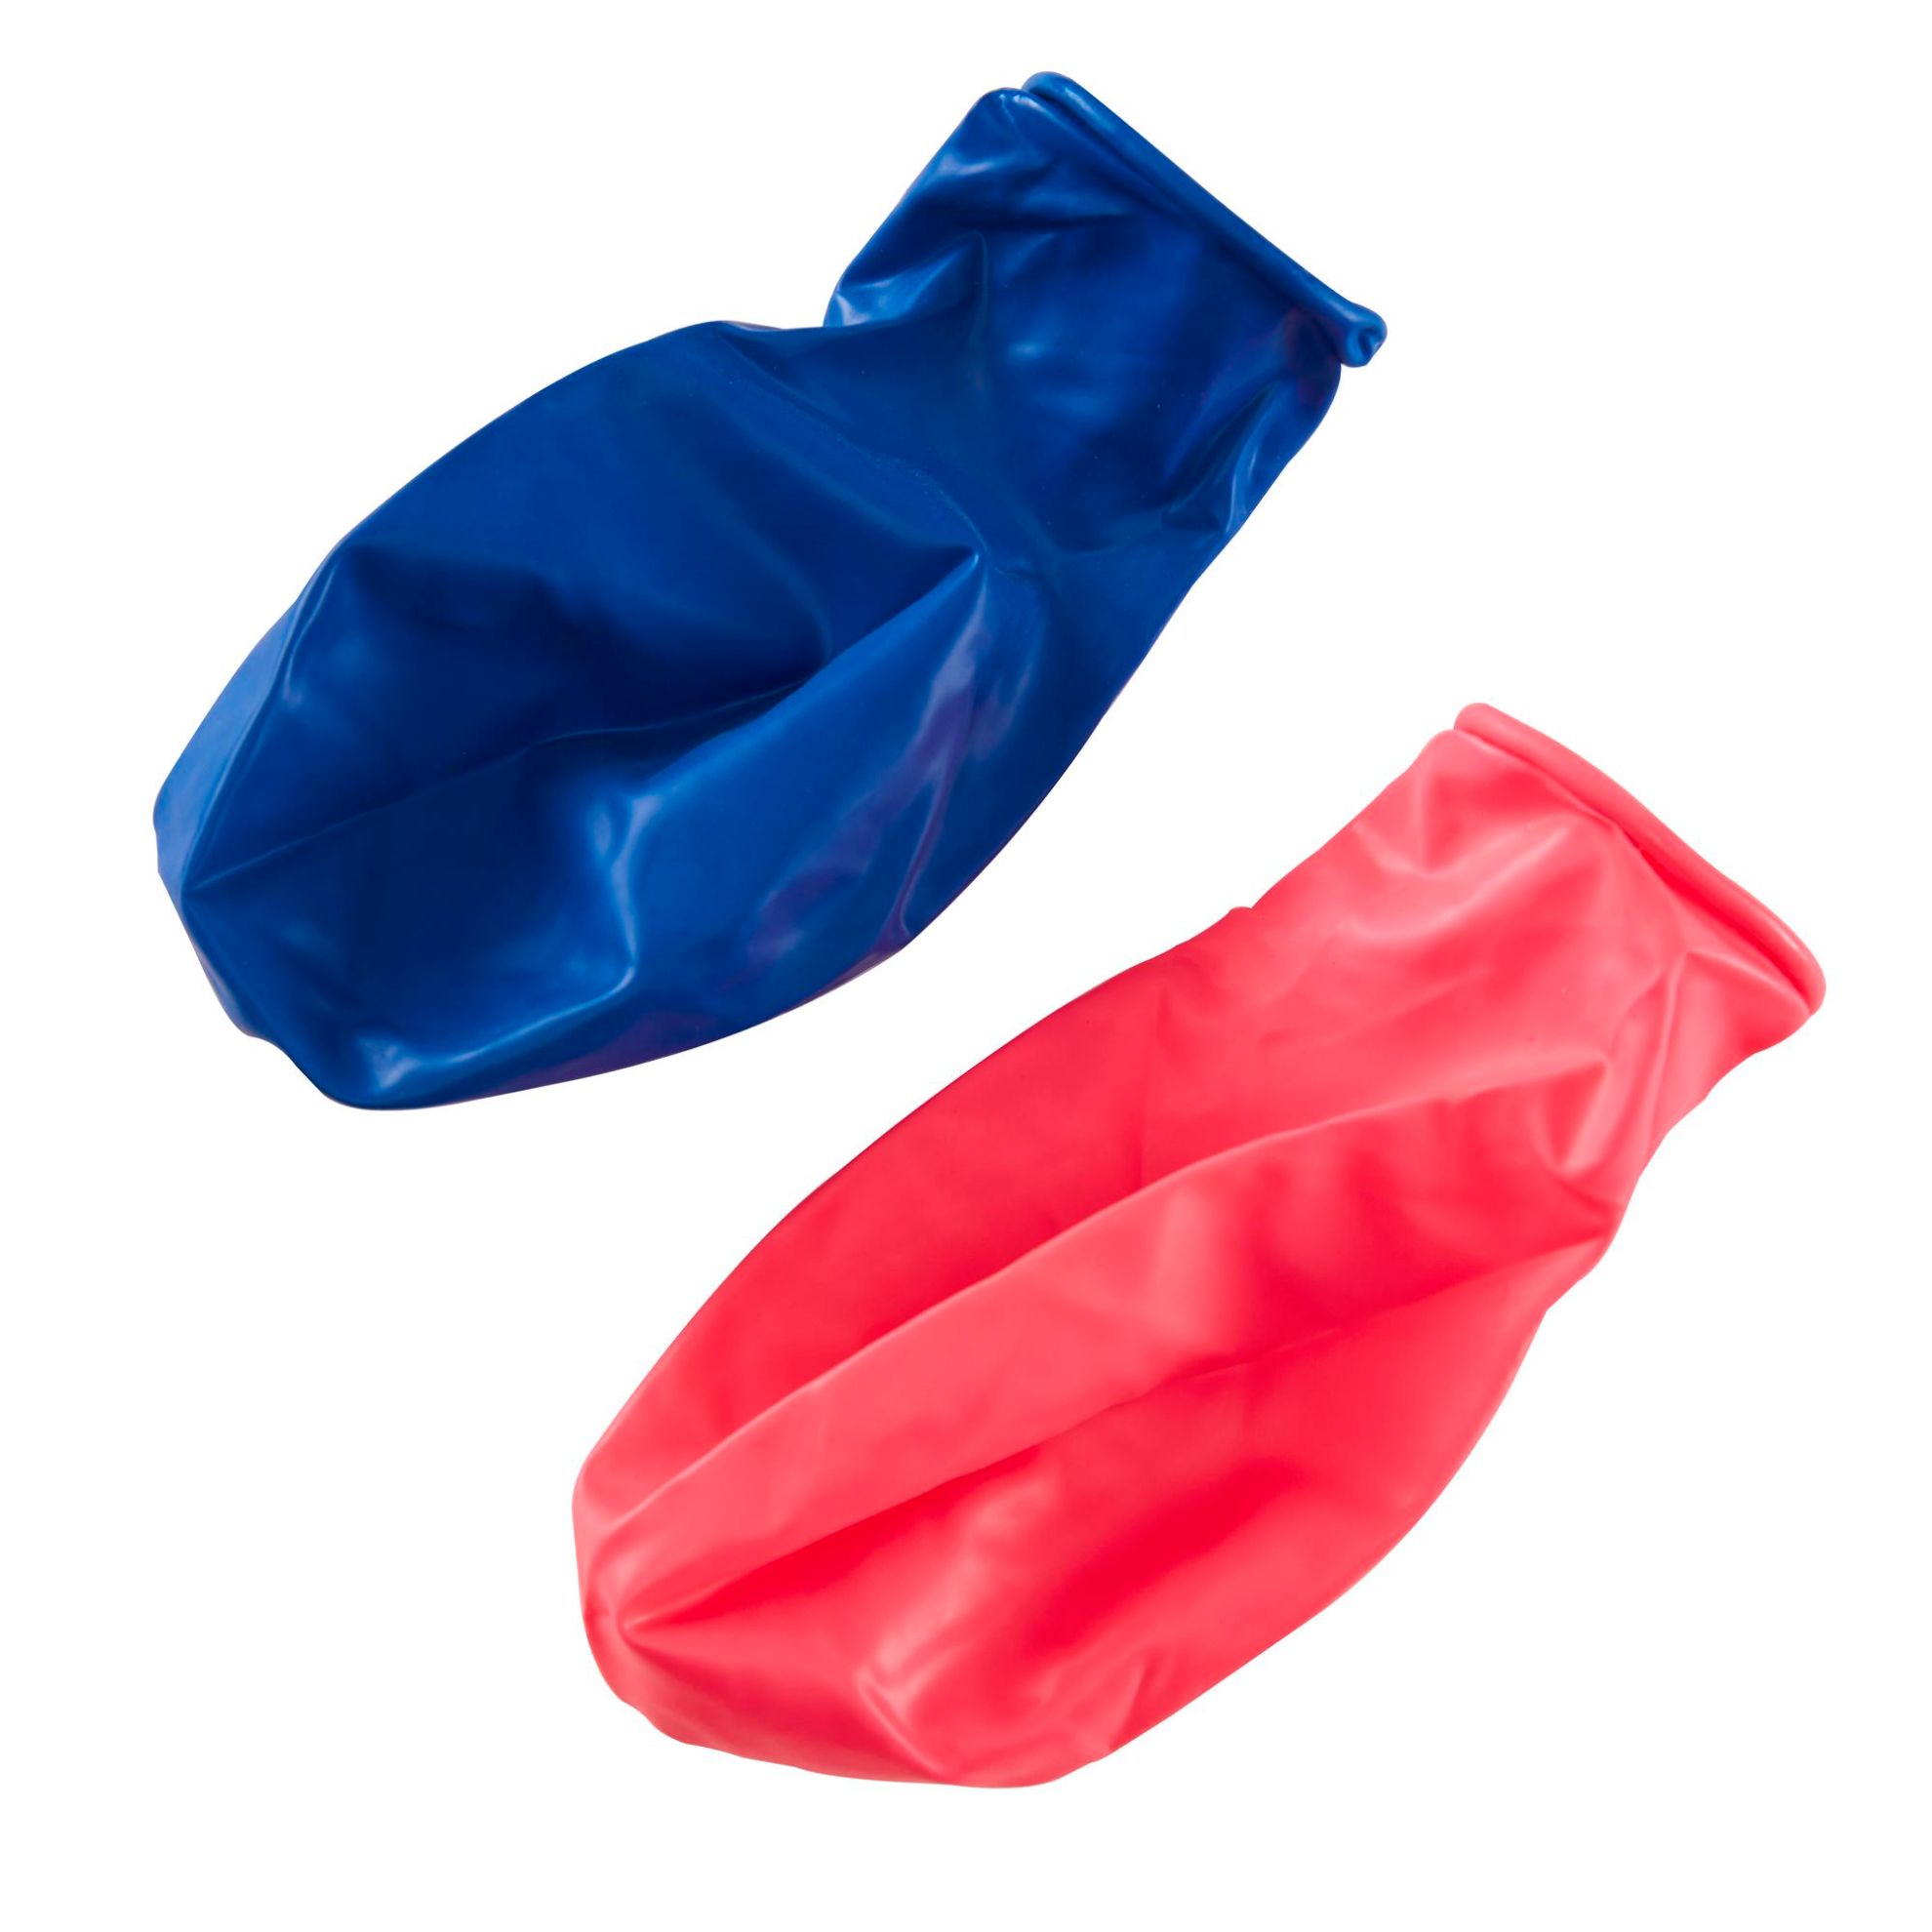 Spare Parts - Doctor Squish Squishy Maker 2 Pack Of BalloonsToys